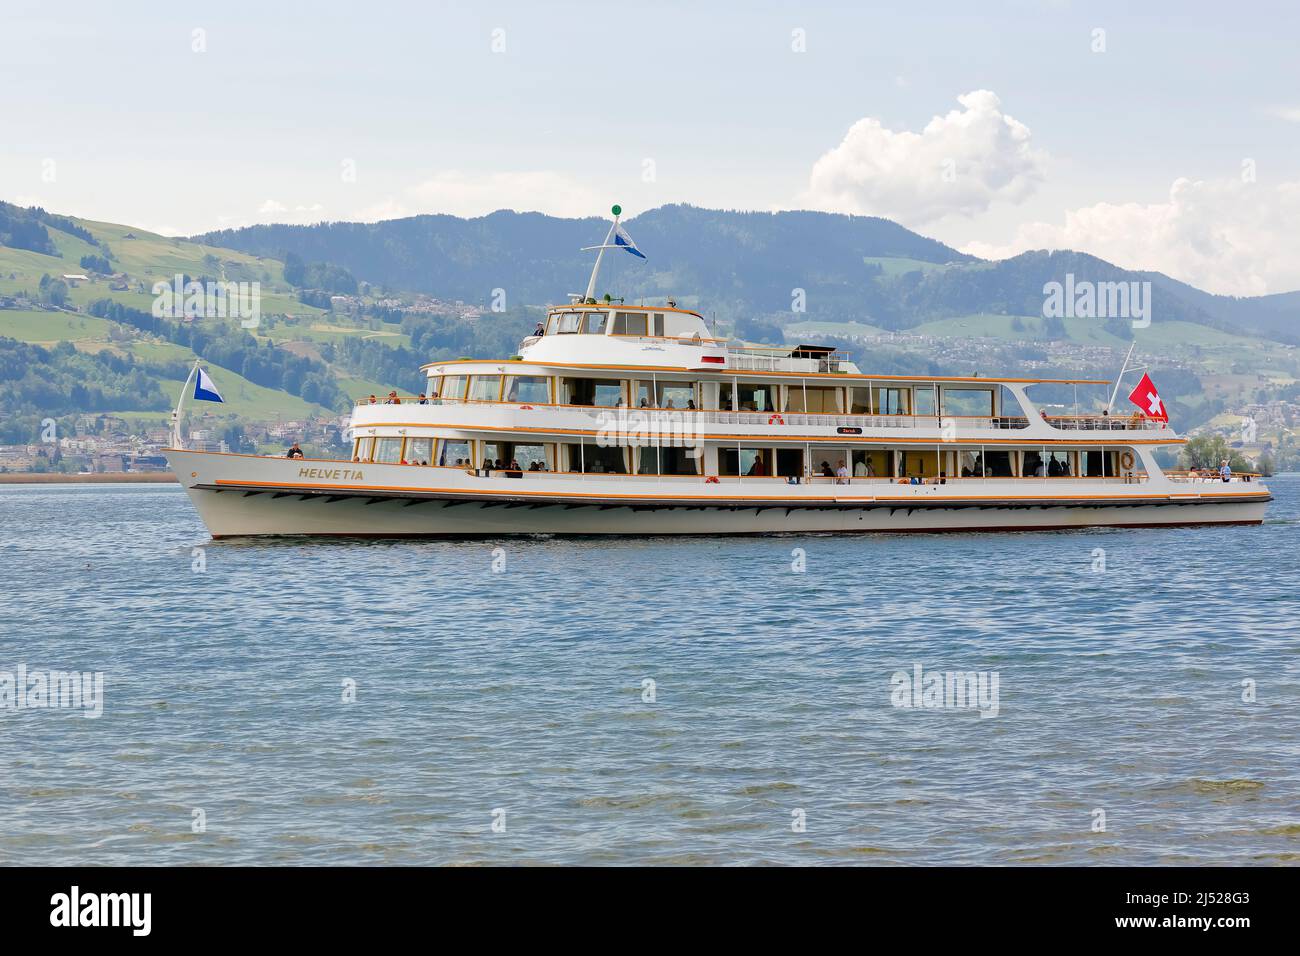 Rapperswil, Switzerland - May 10, 2016: MS Helvetia vessel arrives from Zurich to Rapperswill Ferry Terminal. The name Helvetia expresses the female n Stock Photo